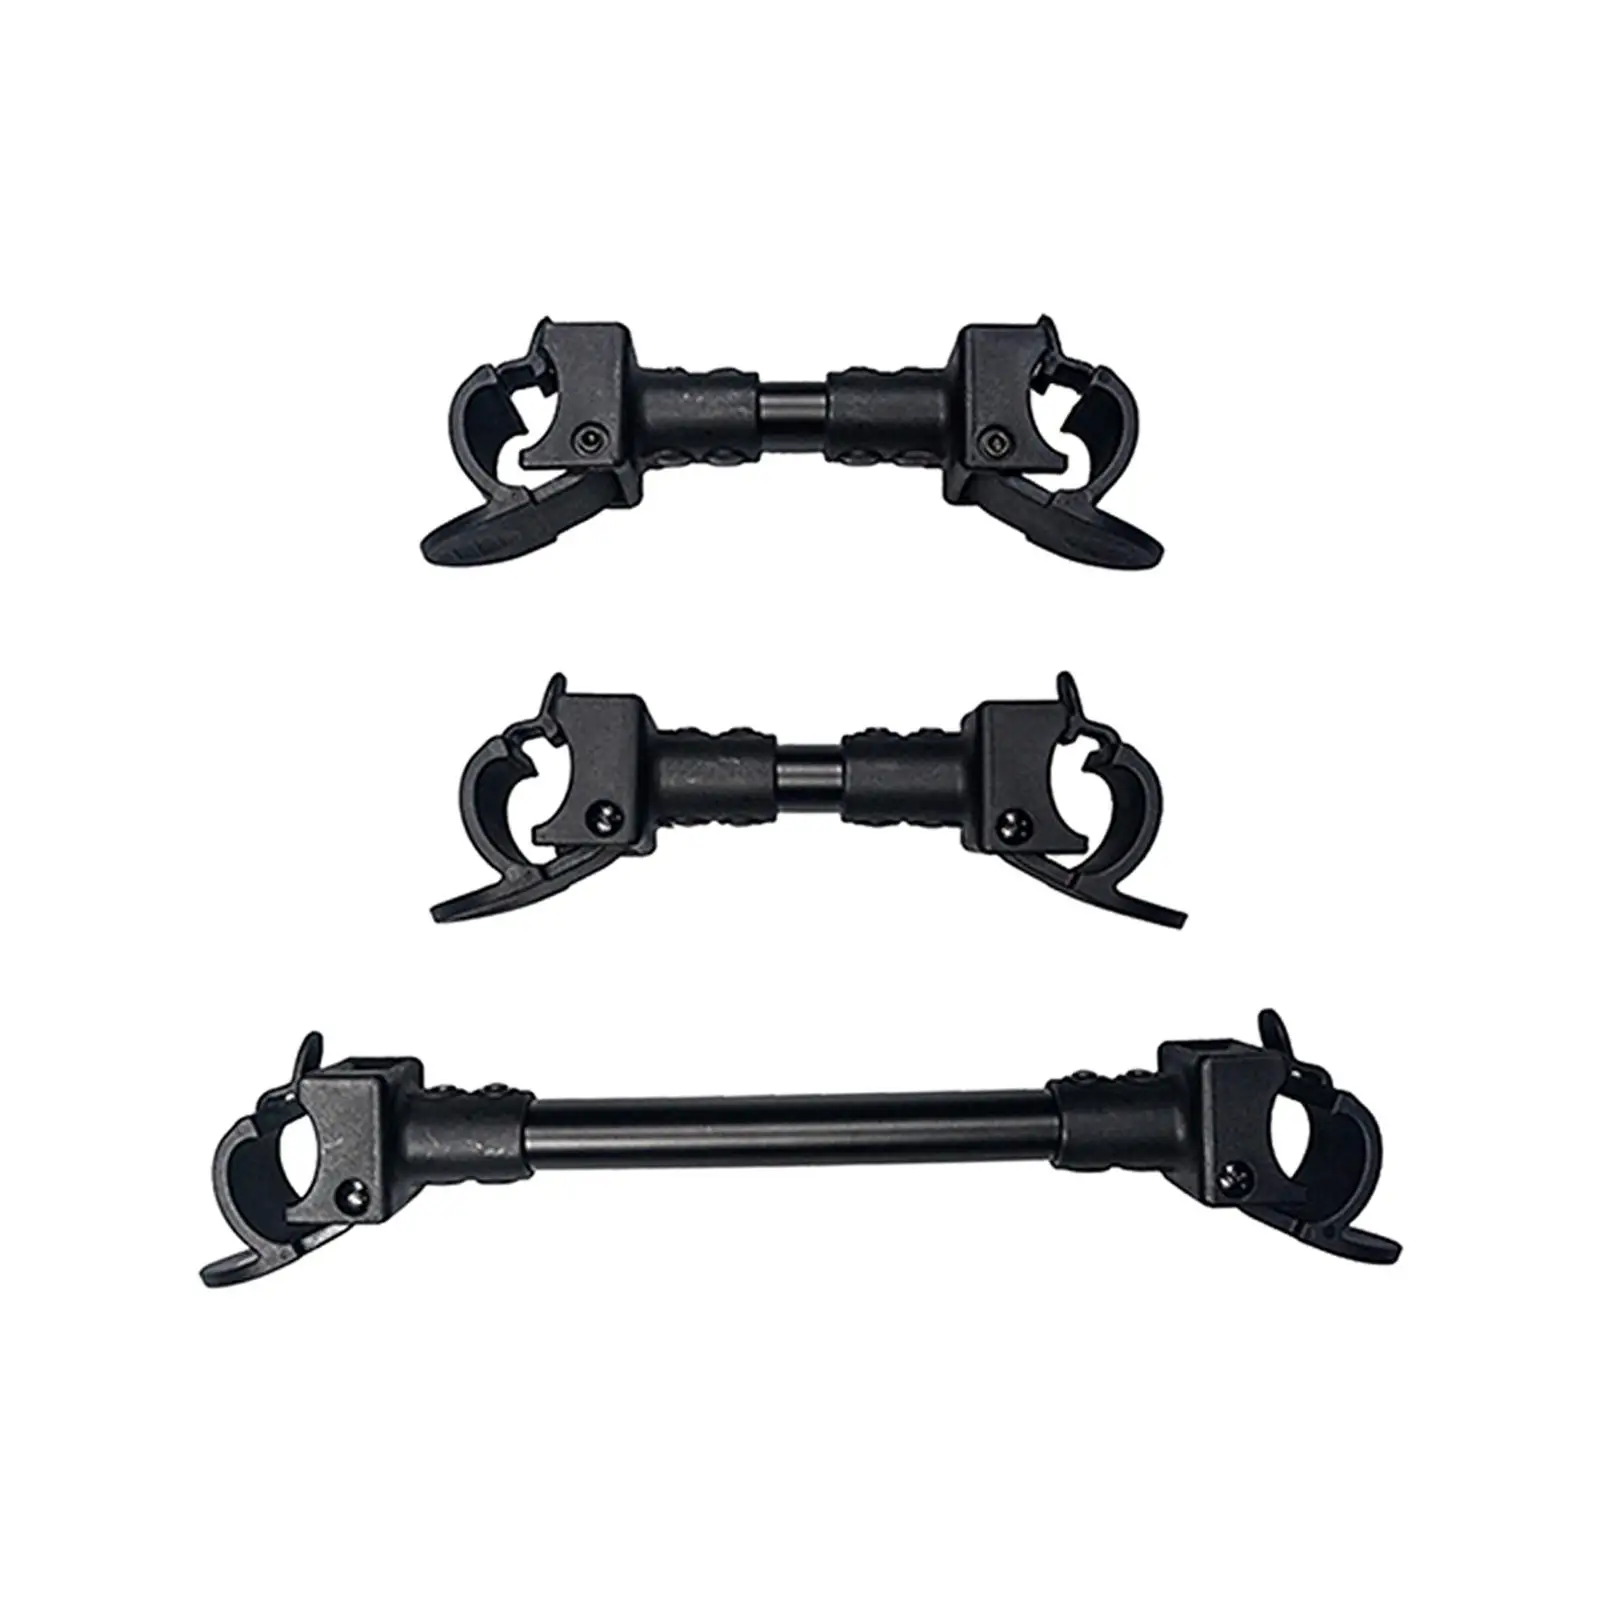 3 Pieces Stroller Connector Durable Portable Linker Universal Joints Adjustable Safety Black Attachment for Babyzen Cart